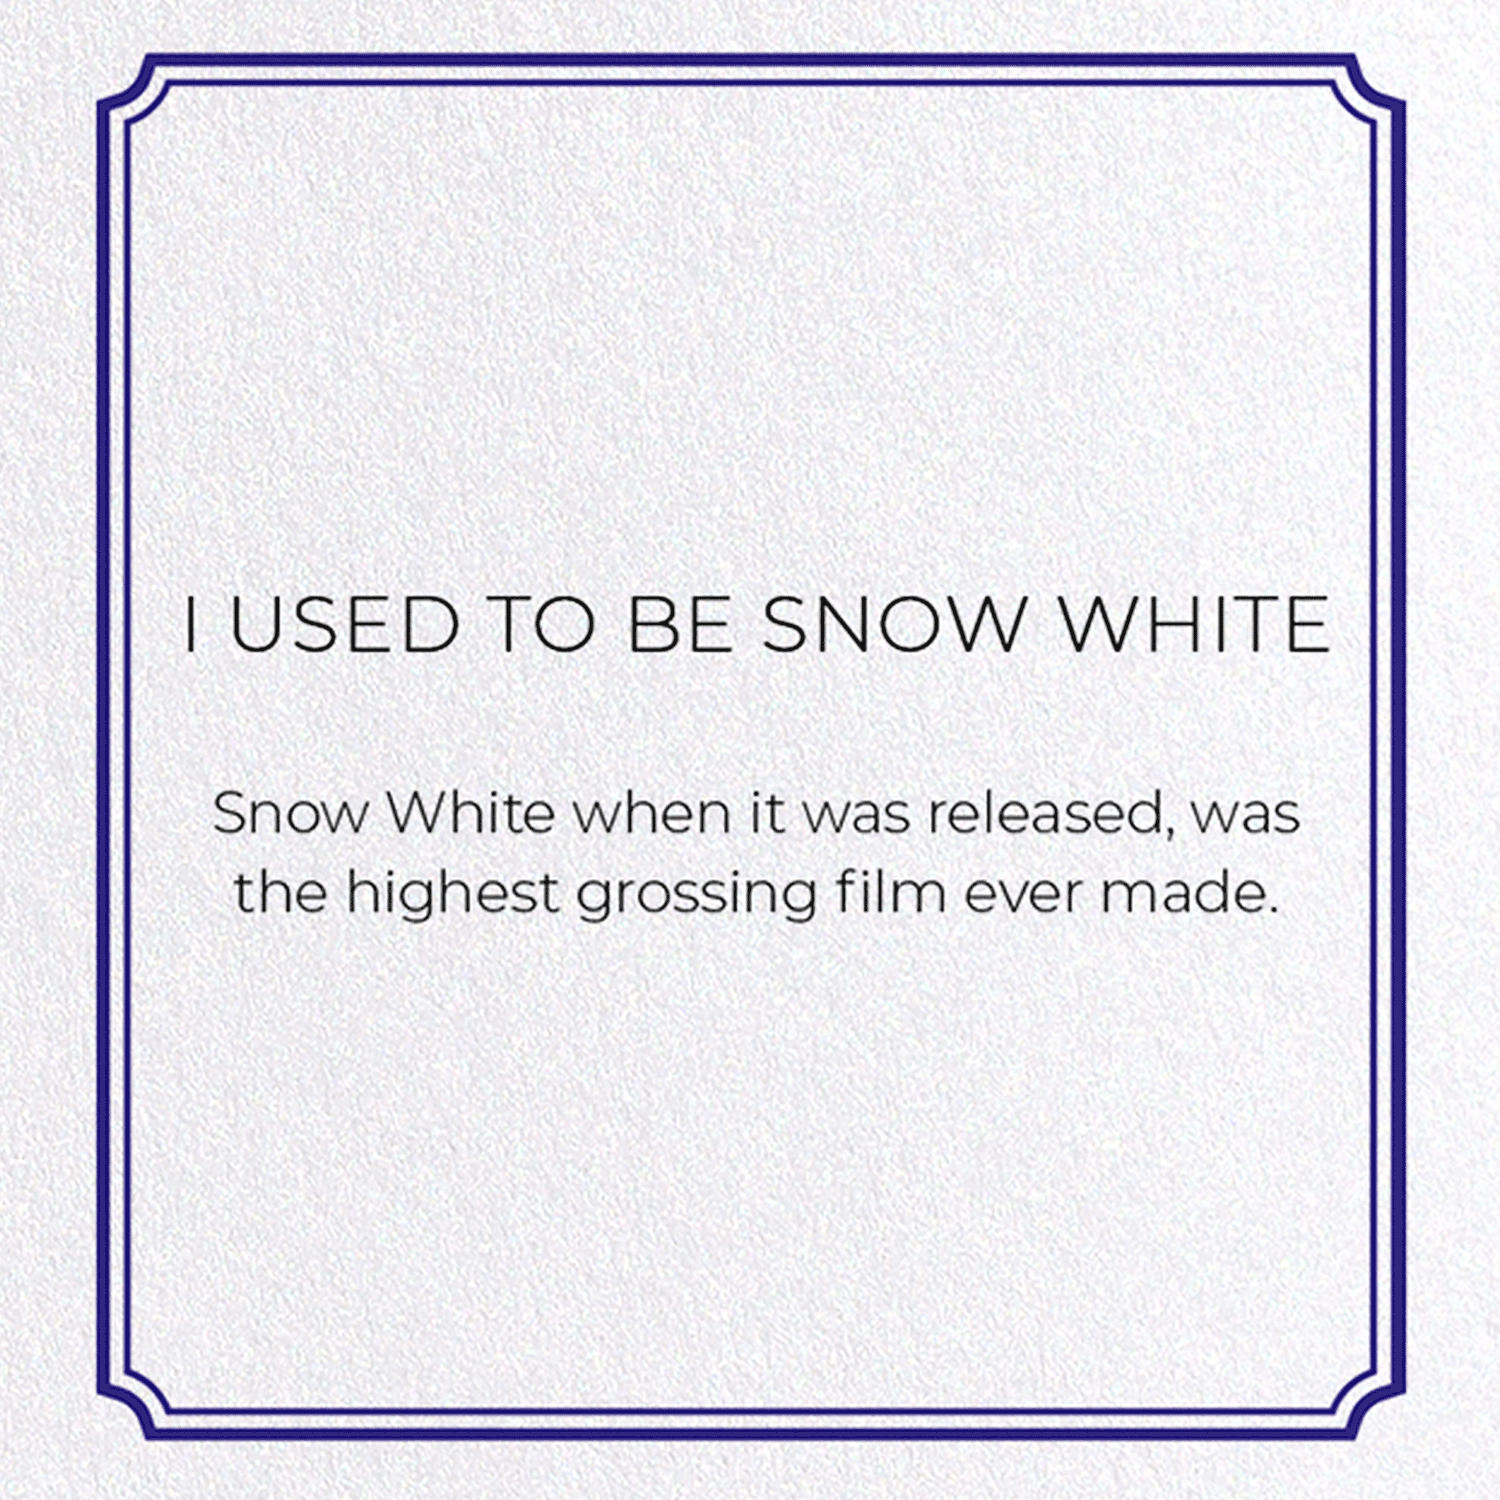 I USED TO BE SNOW WHITE: Vintage Greeting Card